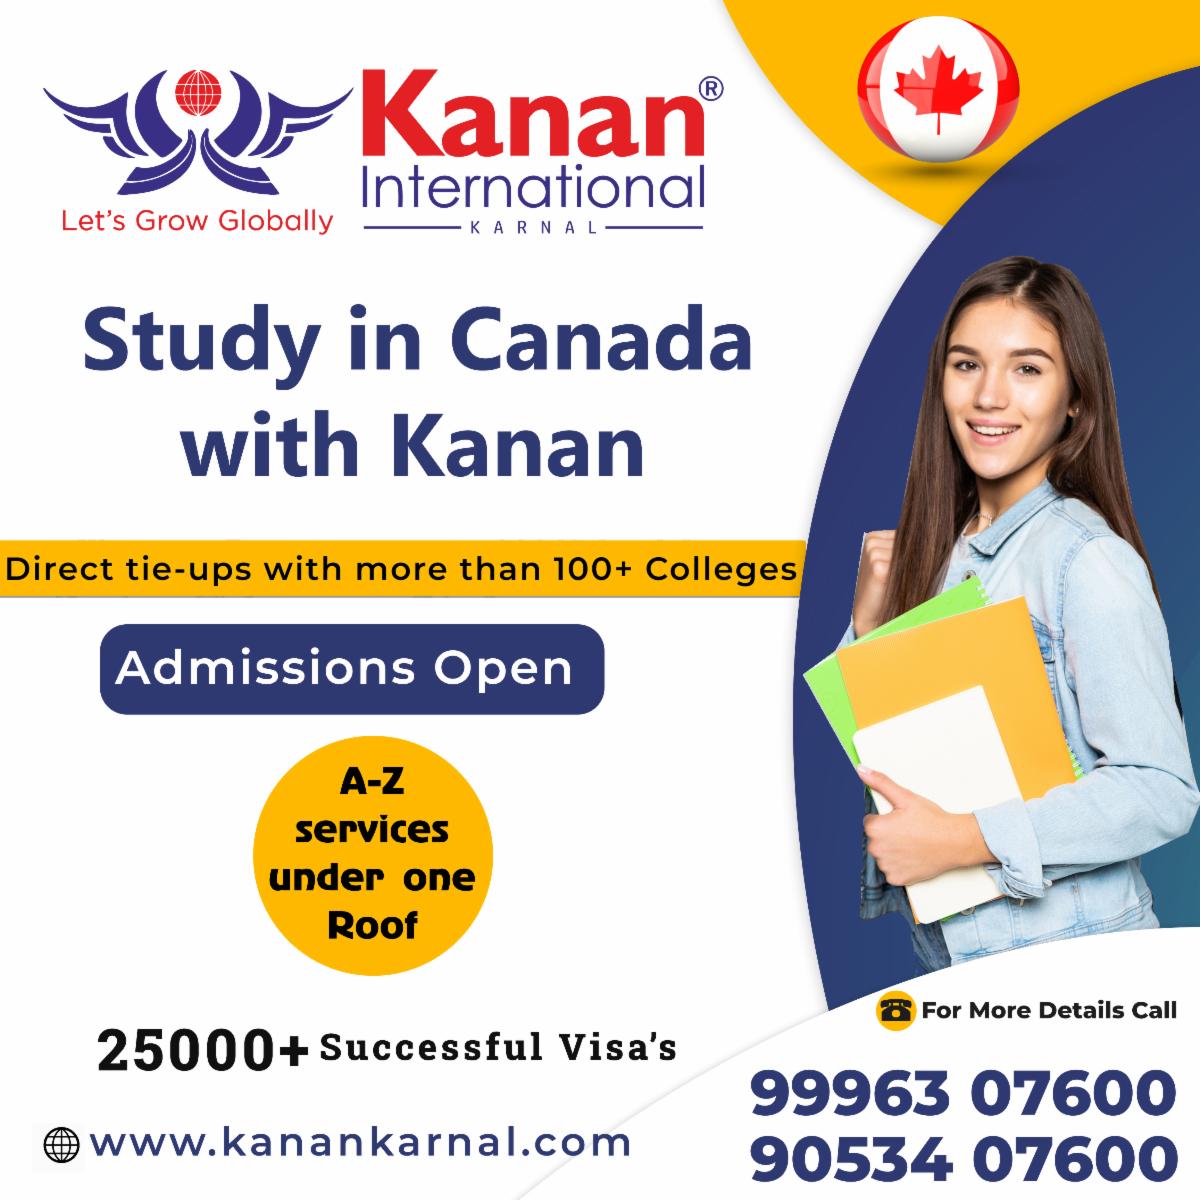 🇨🇦🇨🇦  Study in Canada! 🇨🇦🇨🇦  
Apply for free profile assessment.
Visit: kanankarnal.com
or Call 9996307600

#kanan #kanankarnal #canada #studyincanada #canada #studyinontario #canadauniversity #ontariouniversity #guelph #universityofguelph #studyabroad